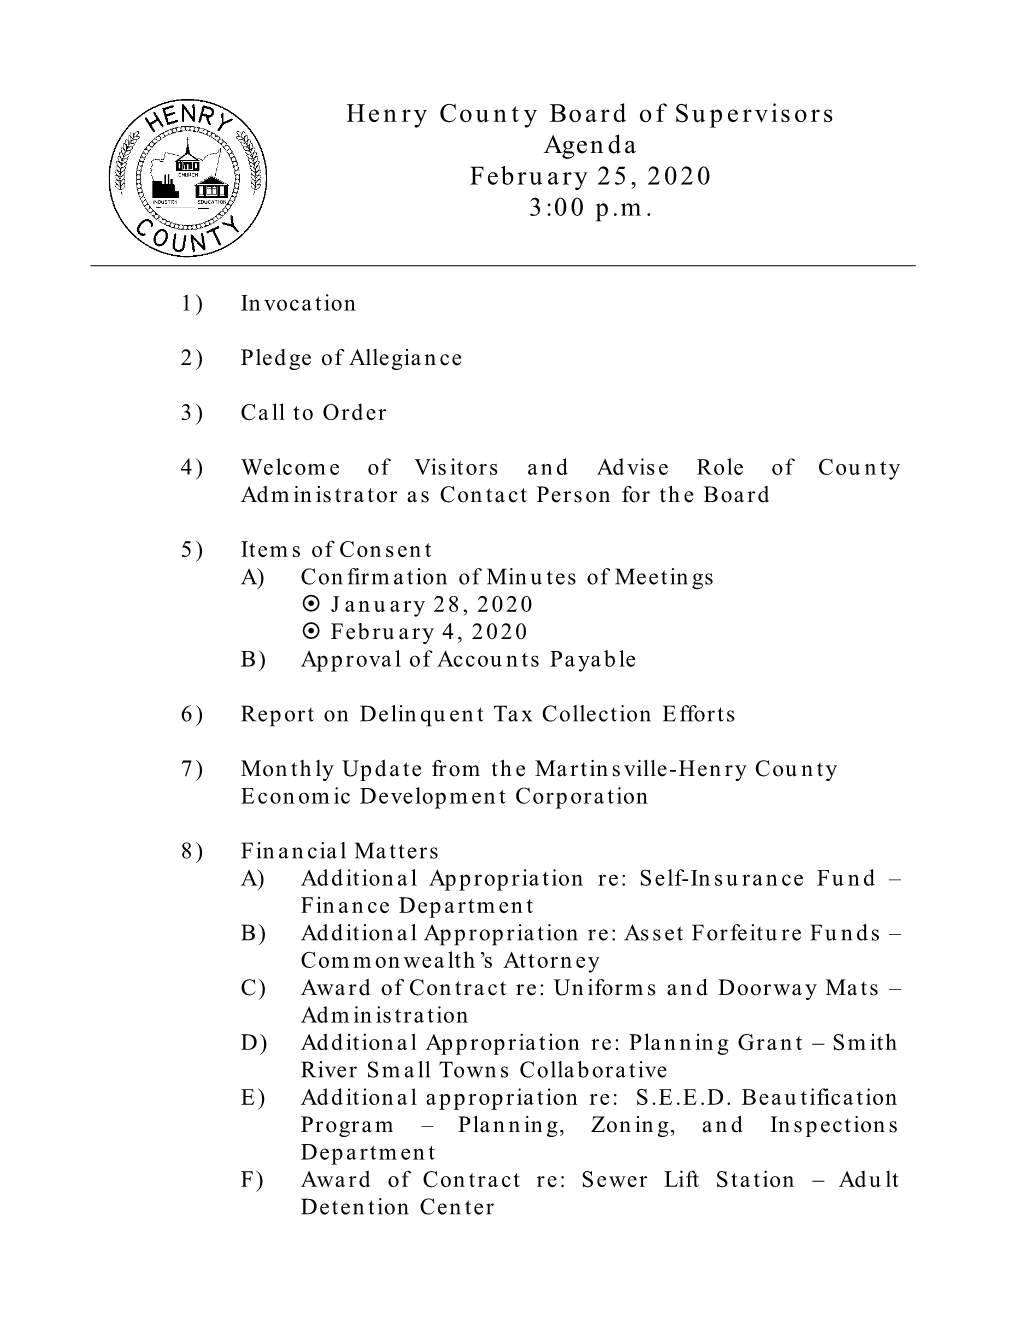 Henry County Board of Supervisors Meeting February 25, 2020